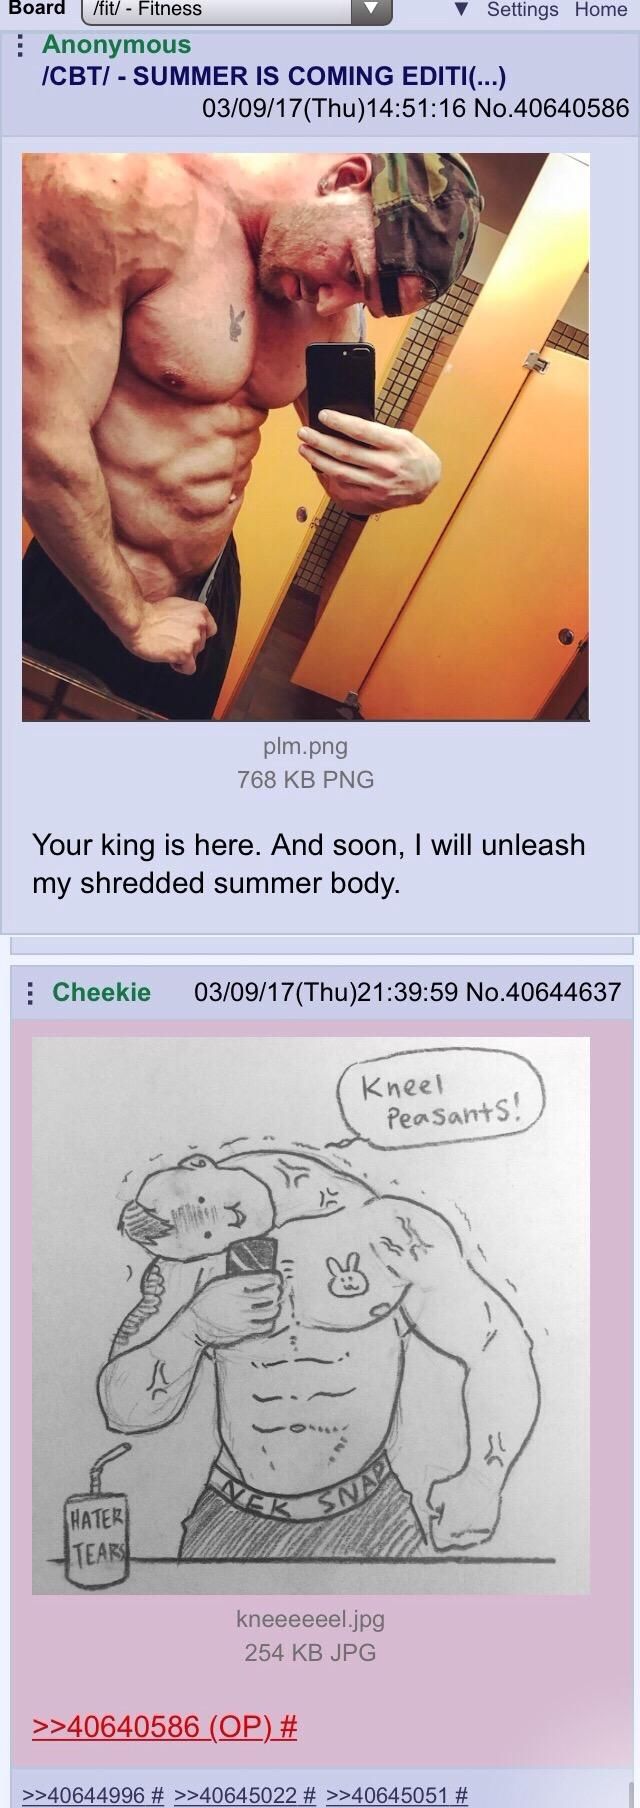 The king of /fit/ gets a royal painting made